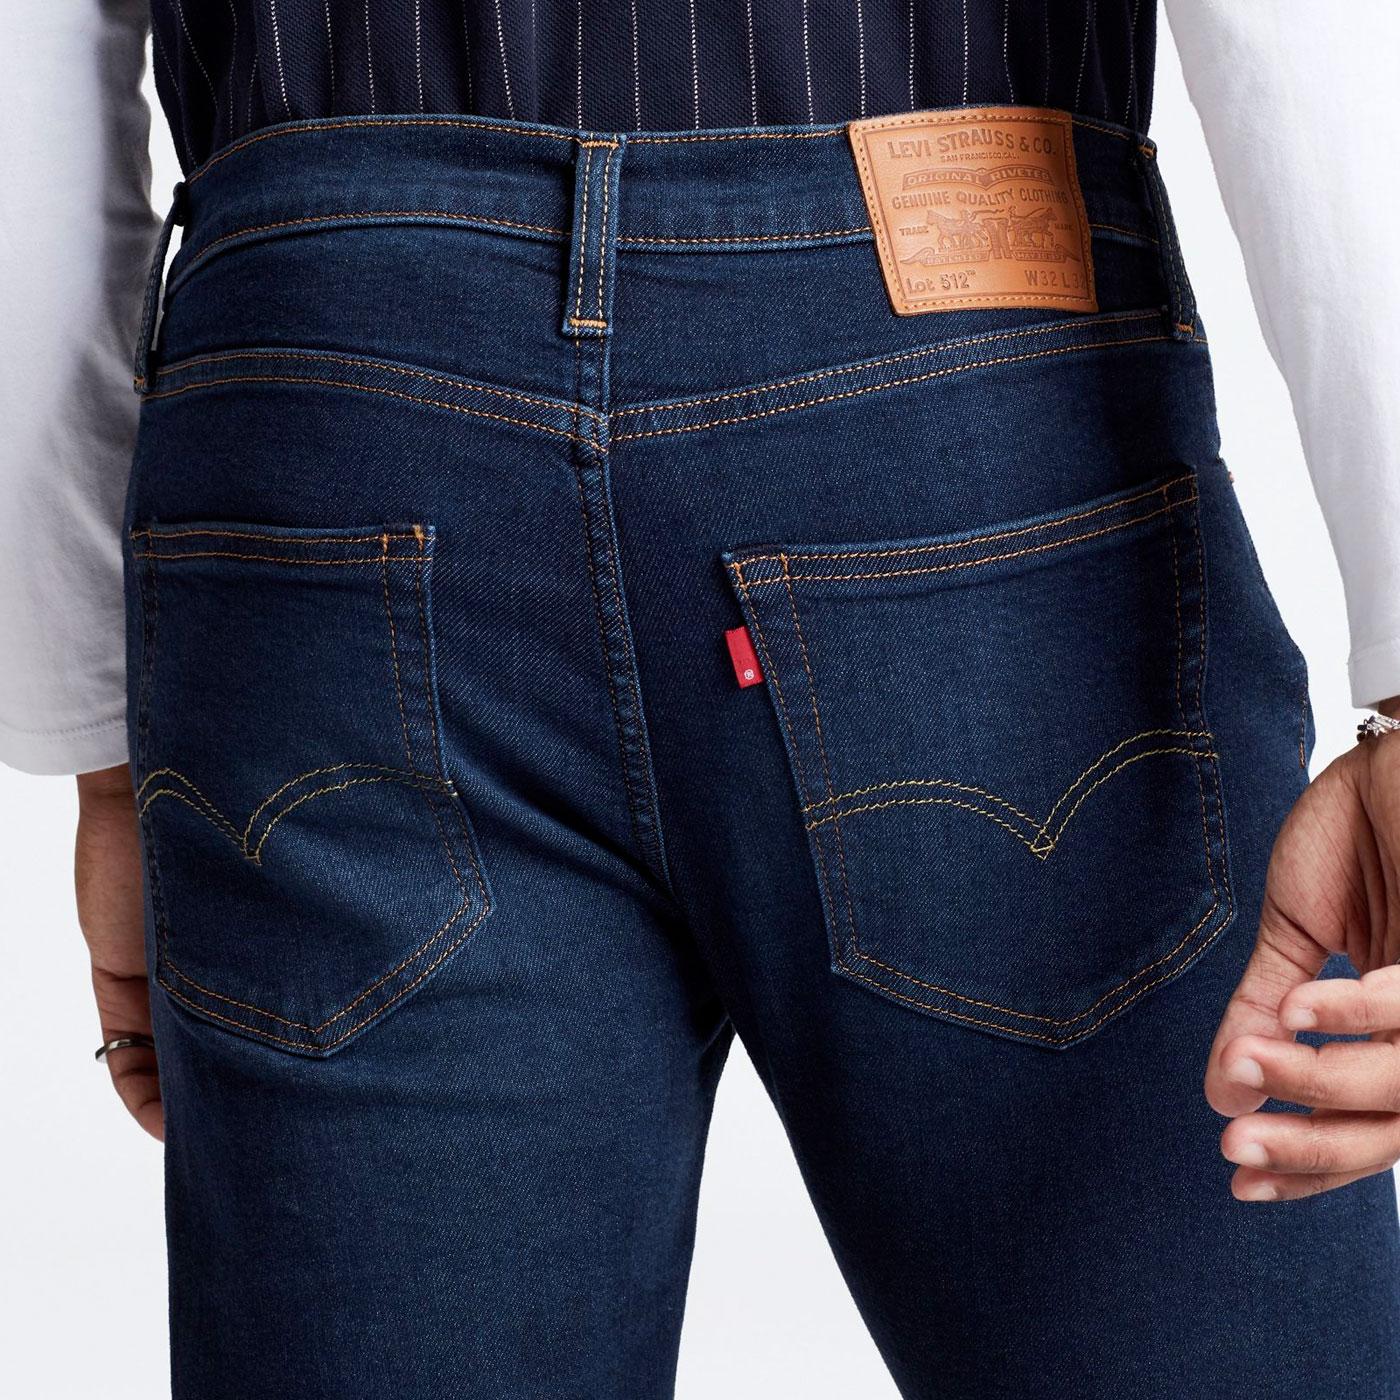 levis navy blue jeans Cheaper Than 